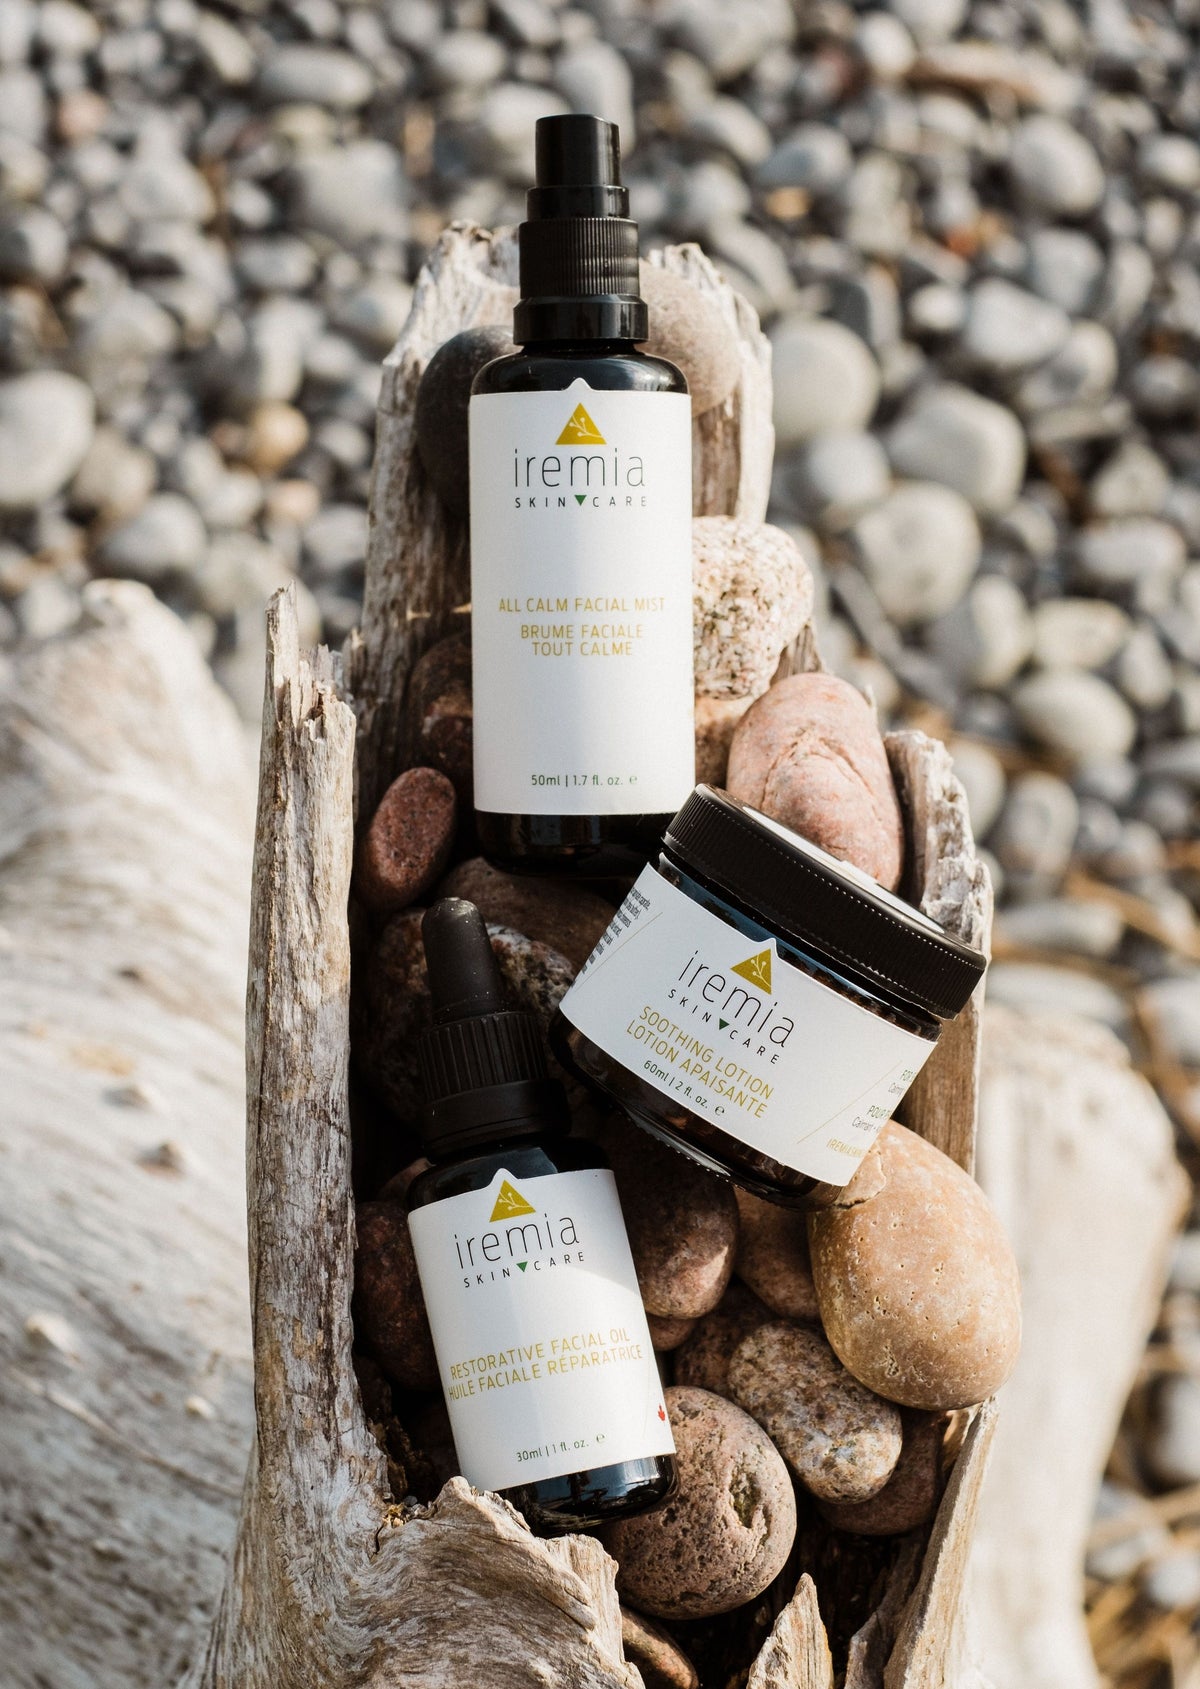 A starter set for sensitive skin. Perfect for hydrating, calming while providing antioxidants, and nutrients. Minimalist, clean beauty for sensitive skin.